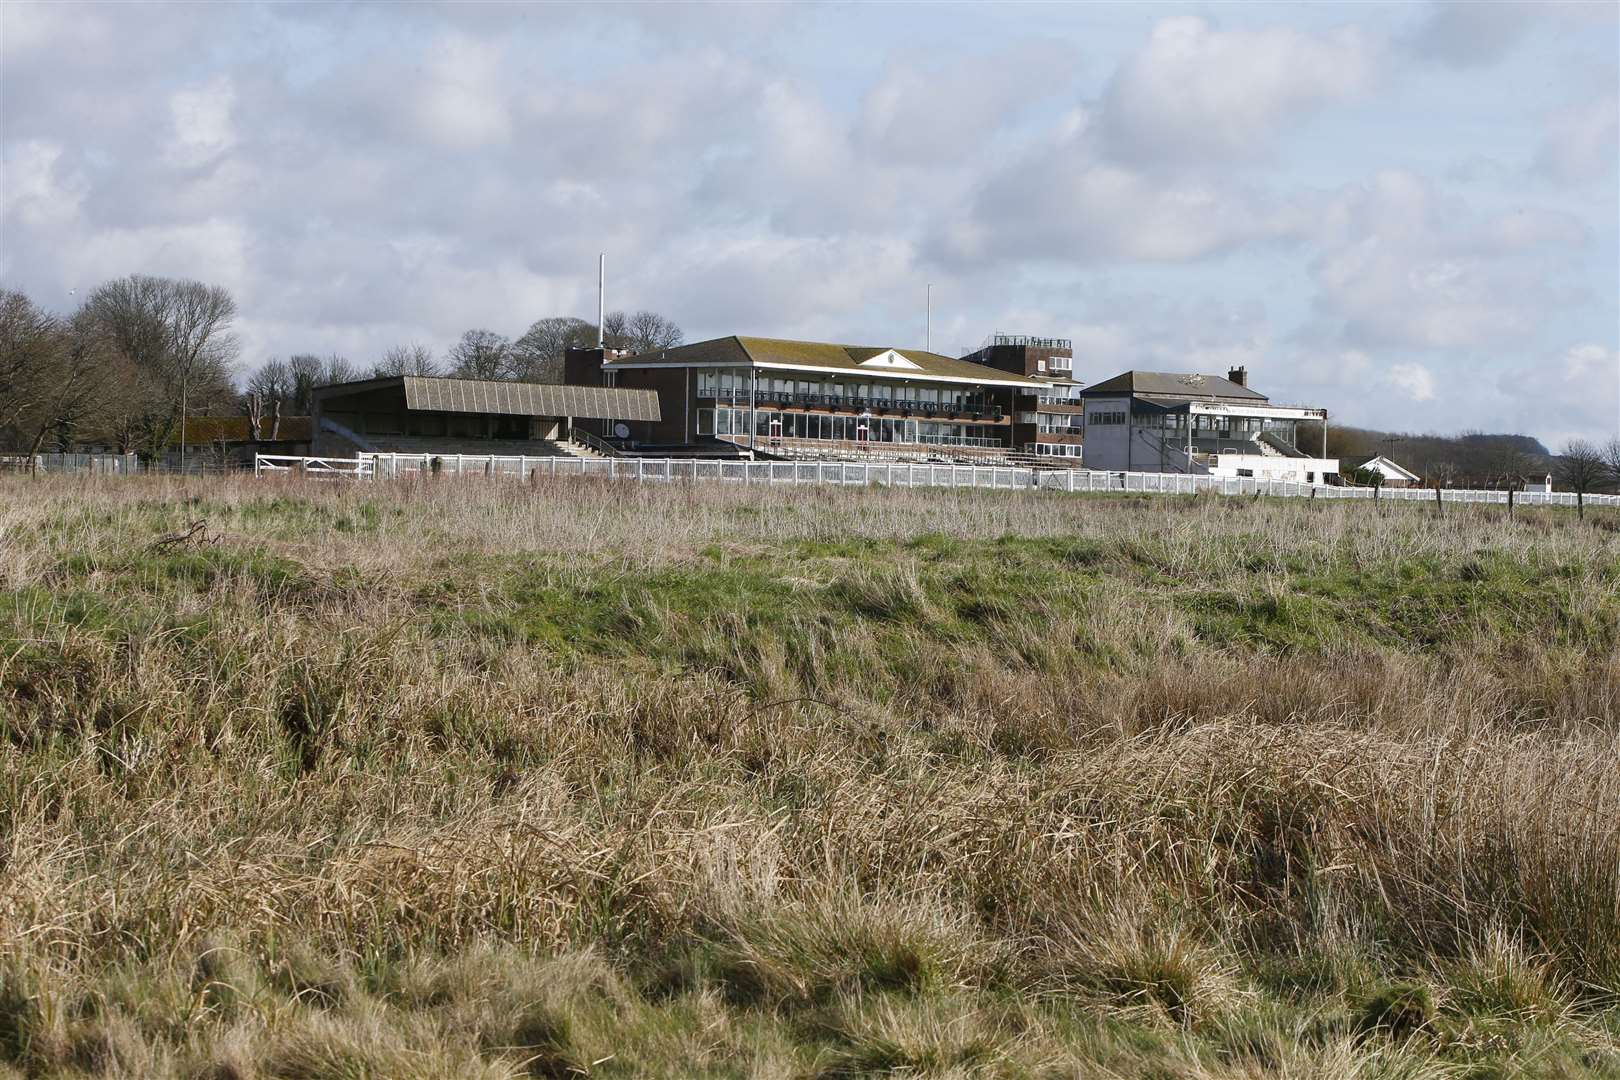 The old grandstand at Folkestone Racecourse used to be packed with spectators on race day